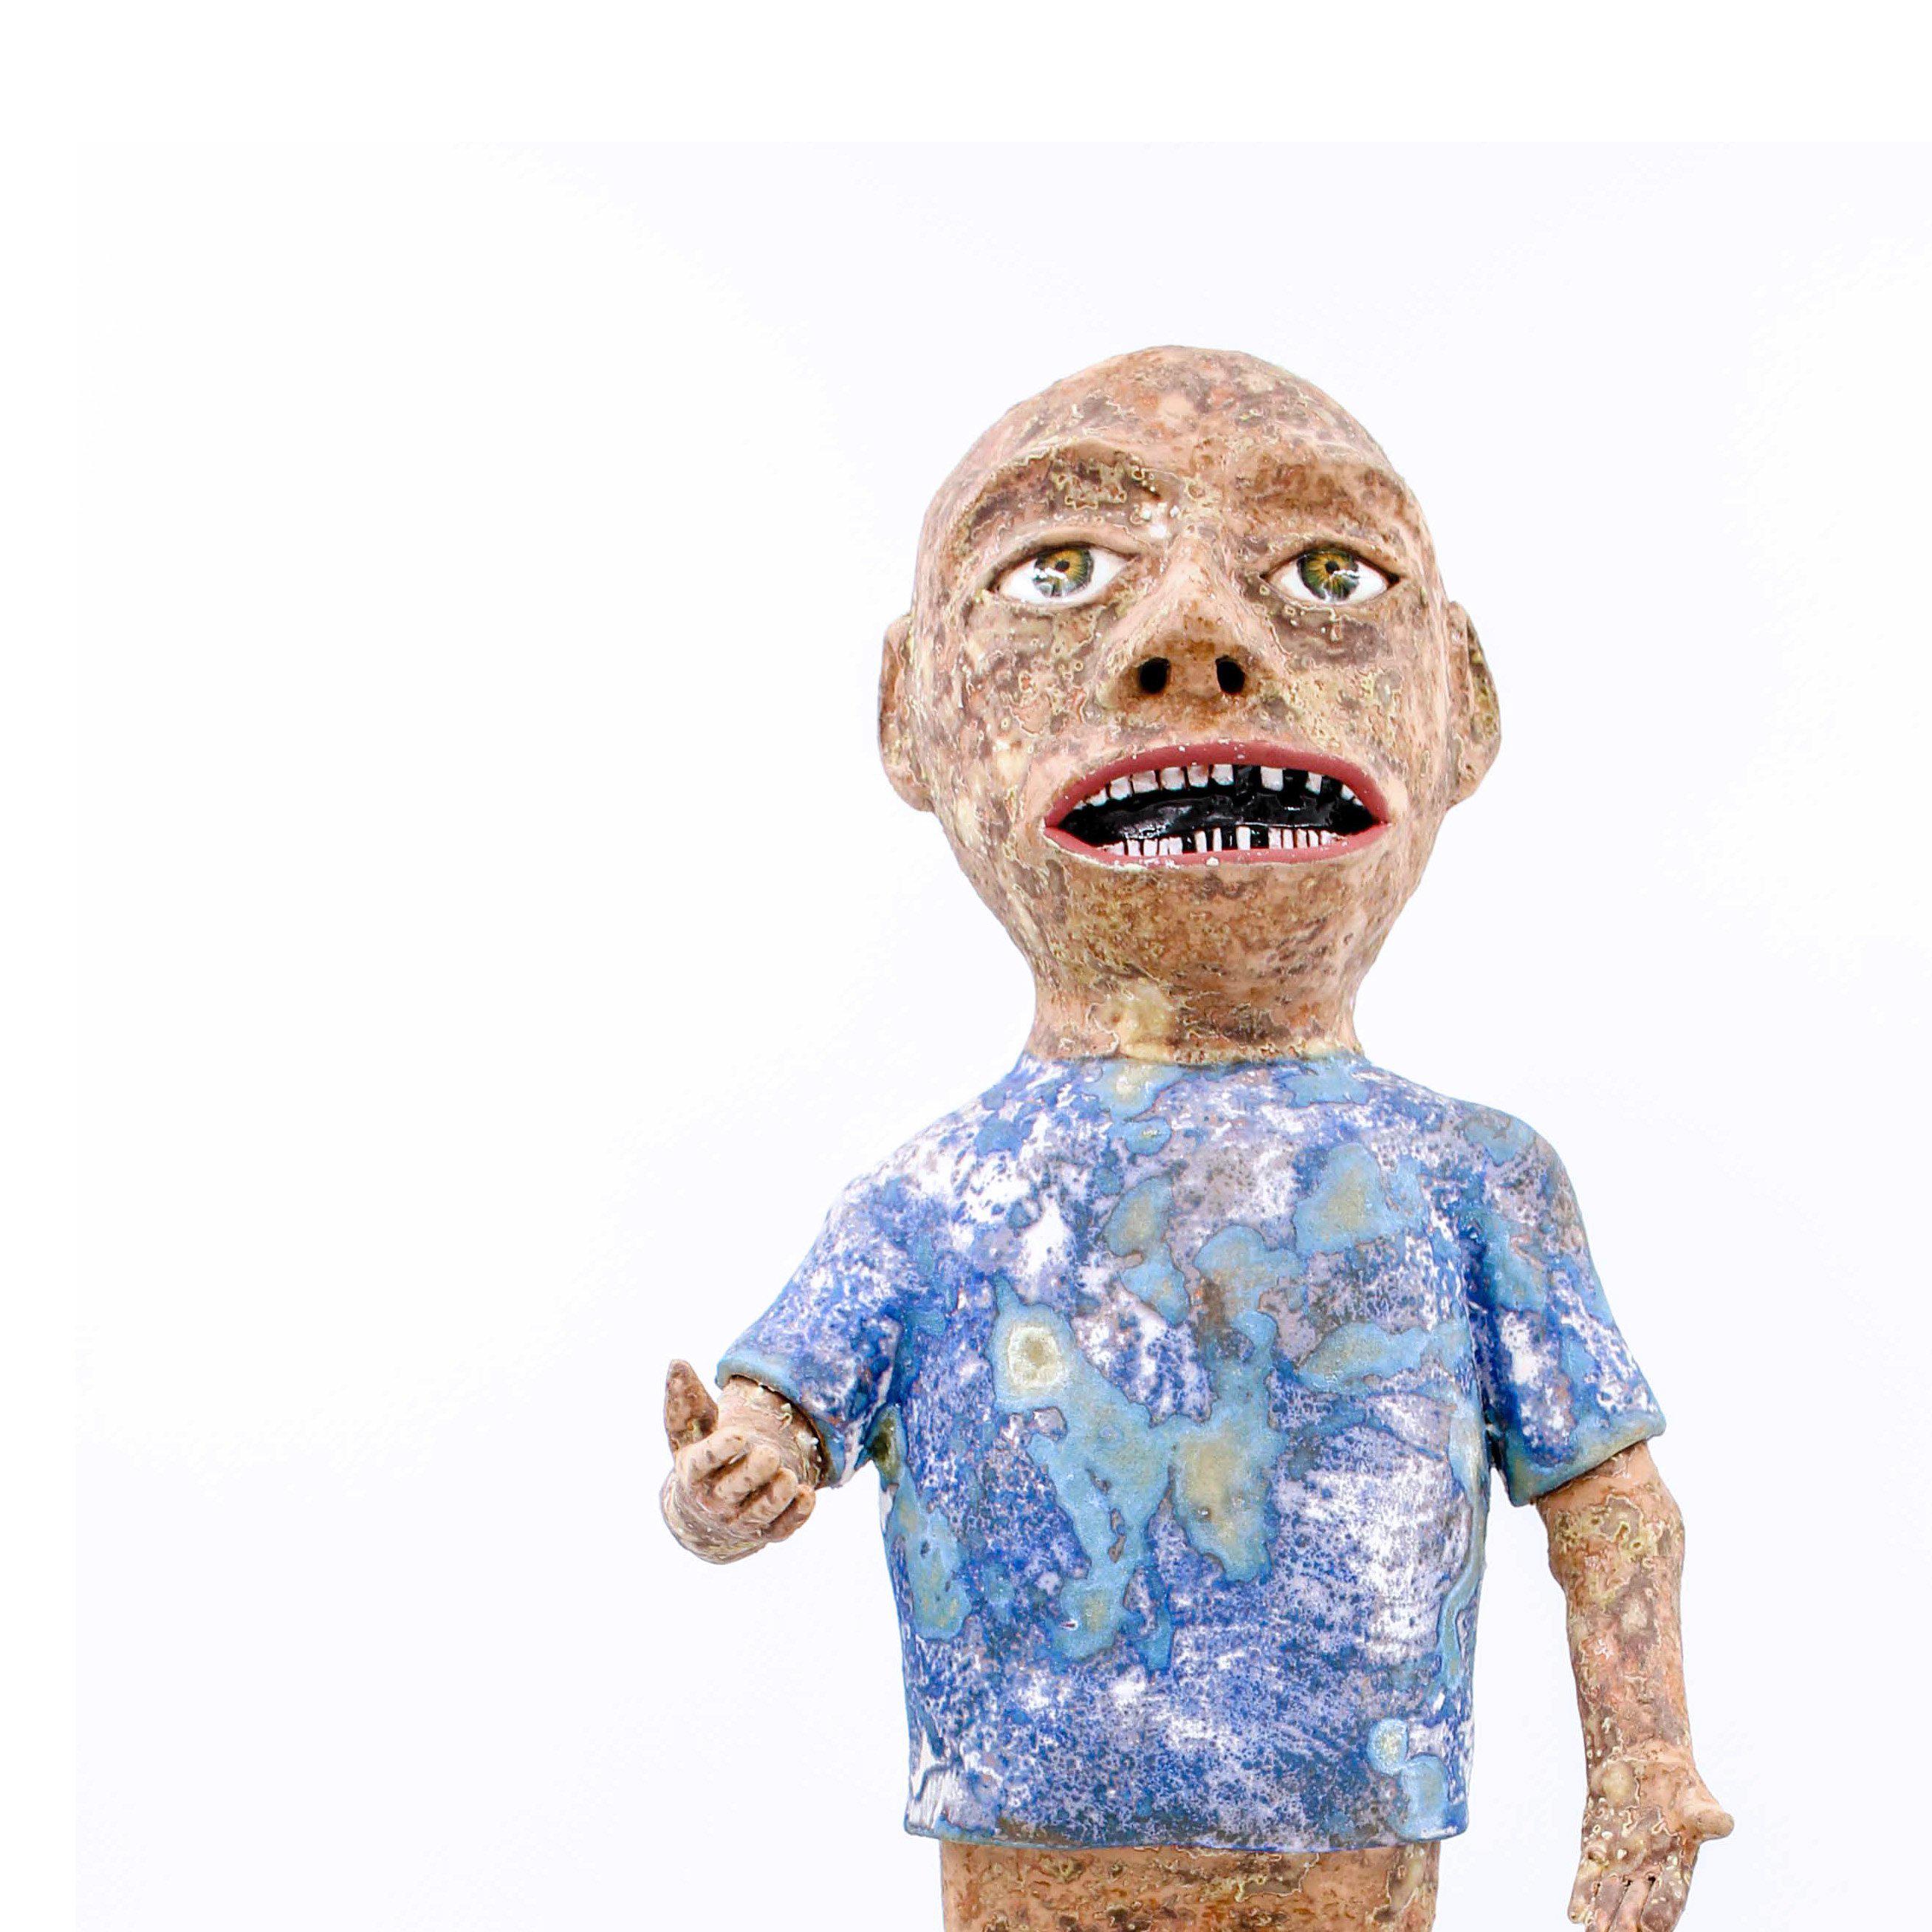 Caught with Pants Down, 2018, ceramic - Contemporary Sculpture by Wesley Anderegg